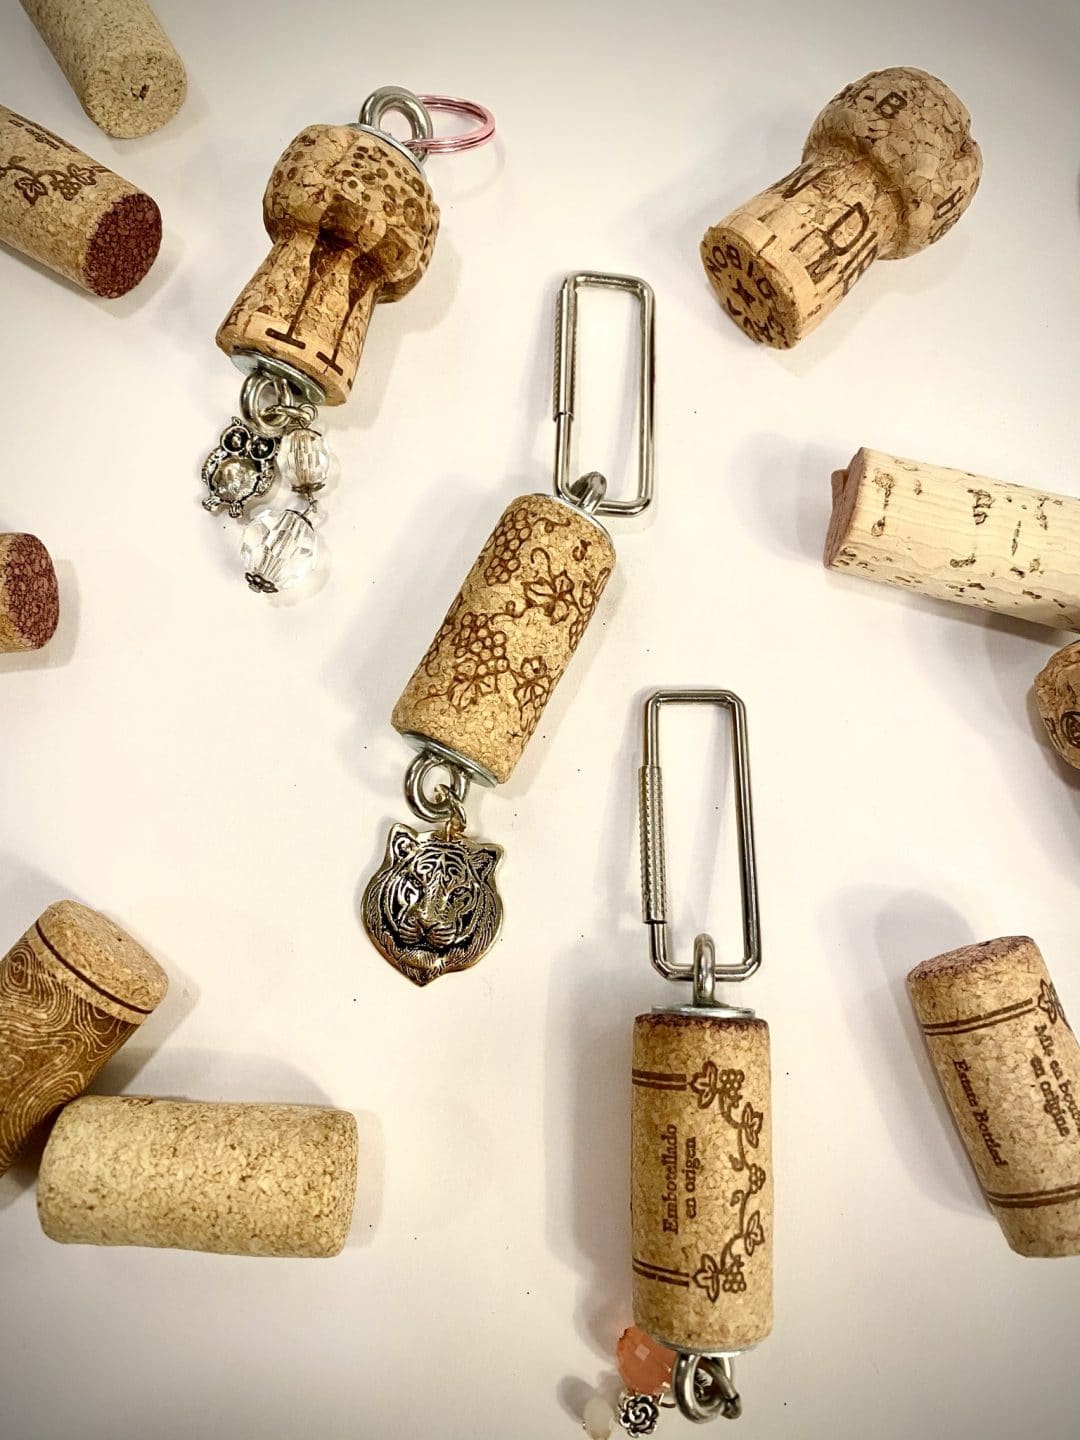 Wine cork keychain DIY craft project from Uncorked Canvas